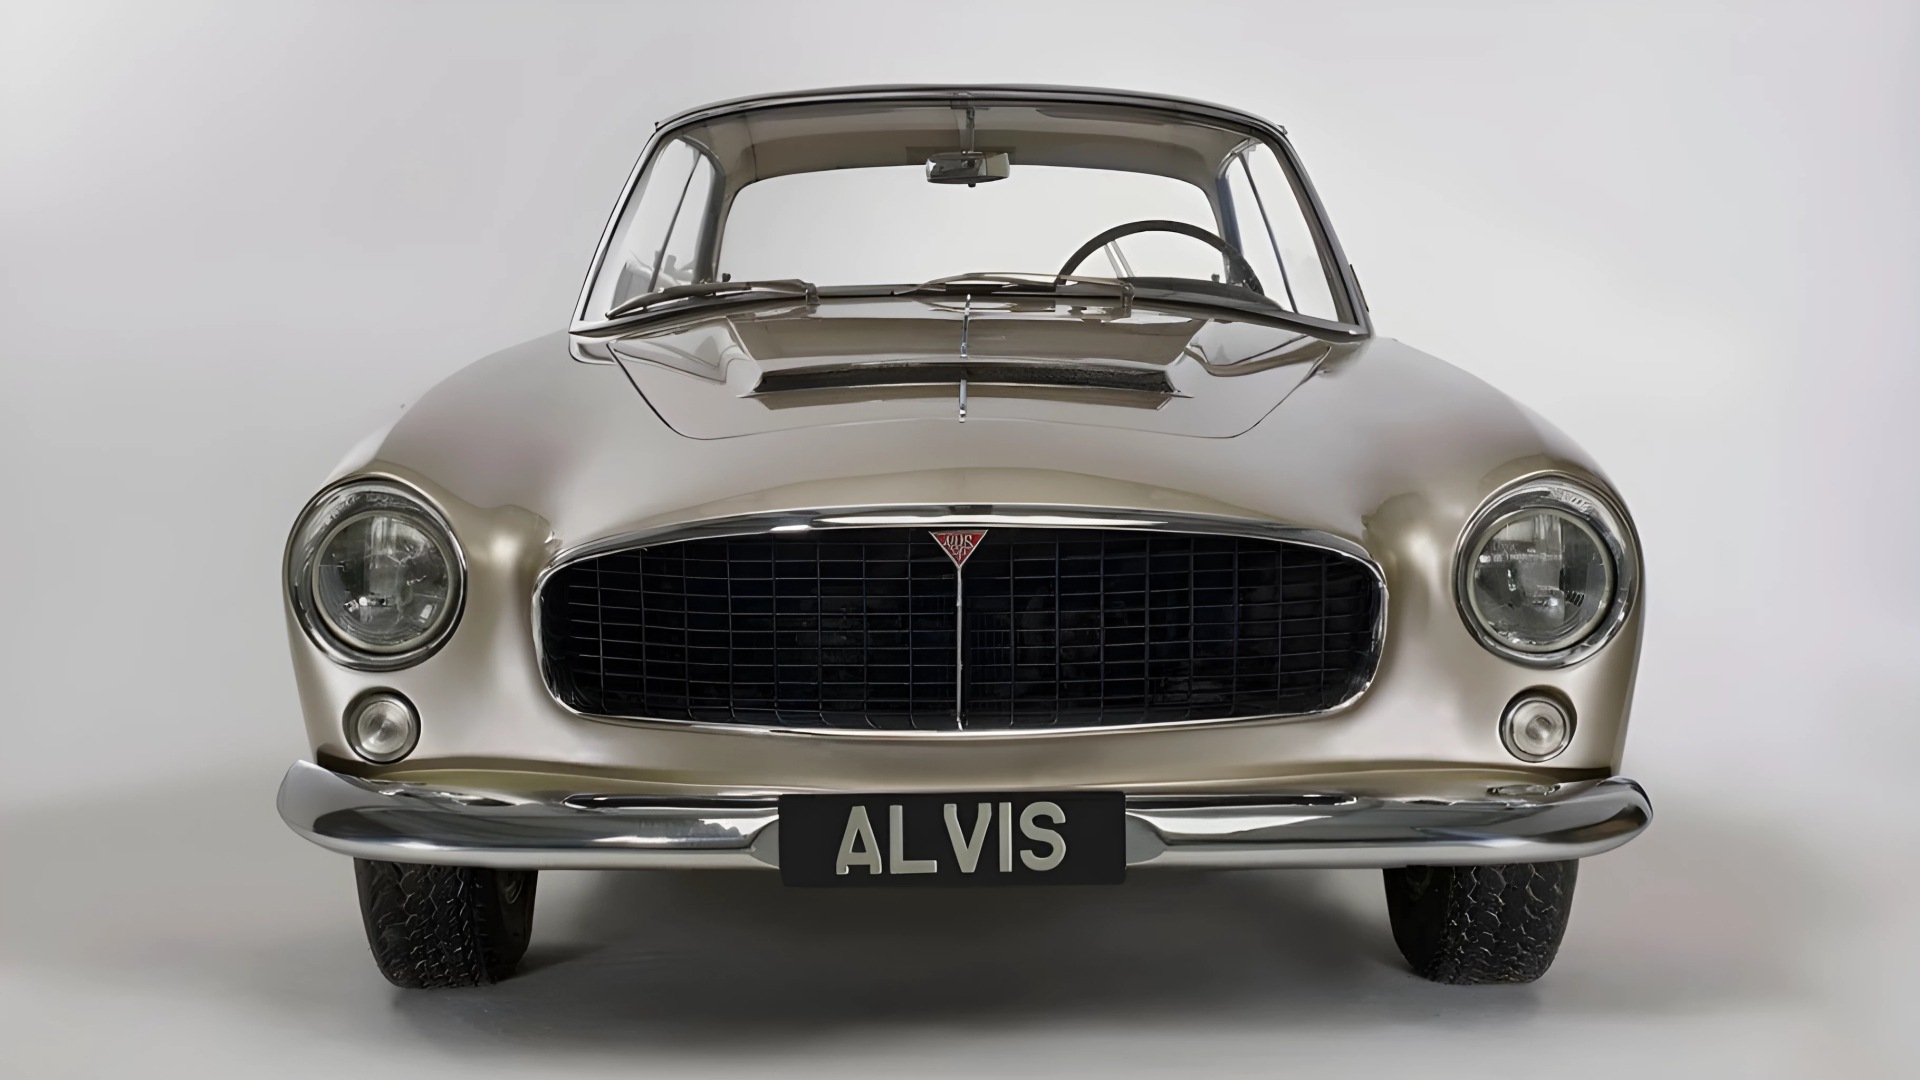 The Front Profile Of The Alvis Graber Super Coupe